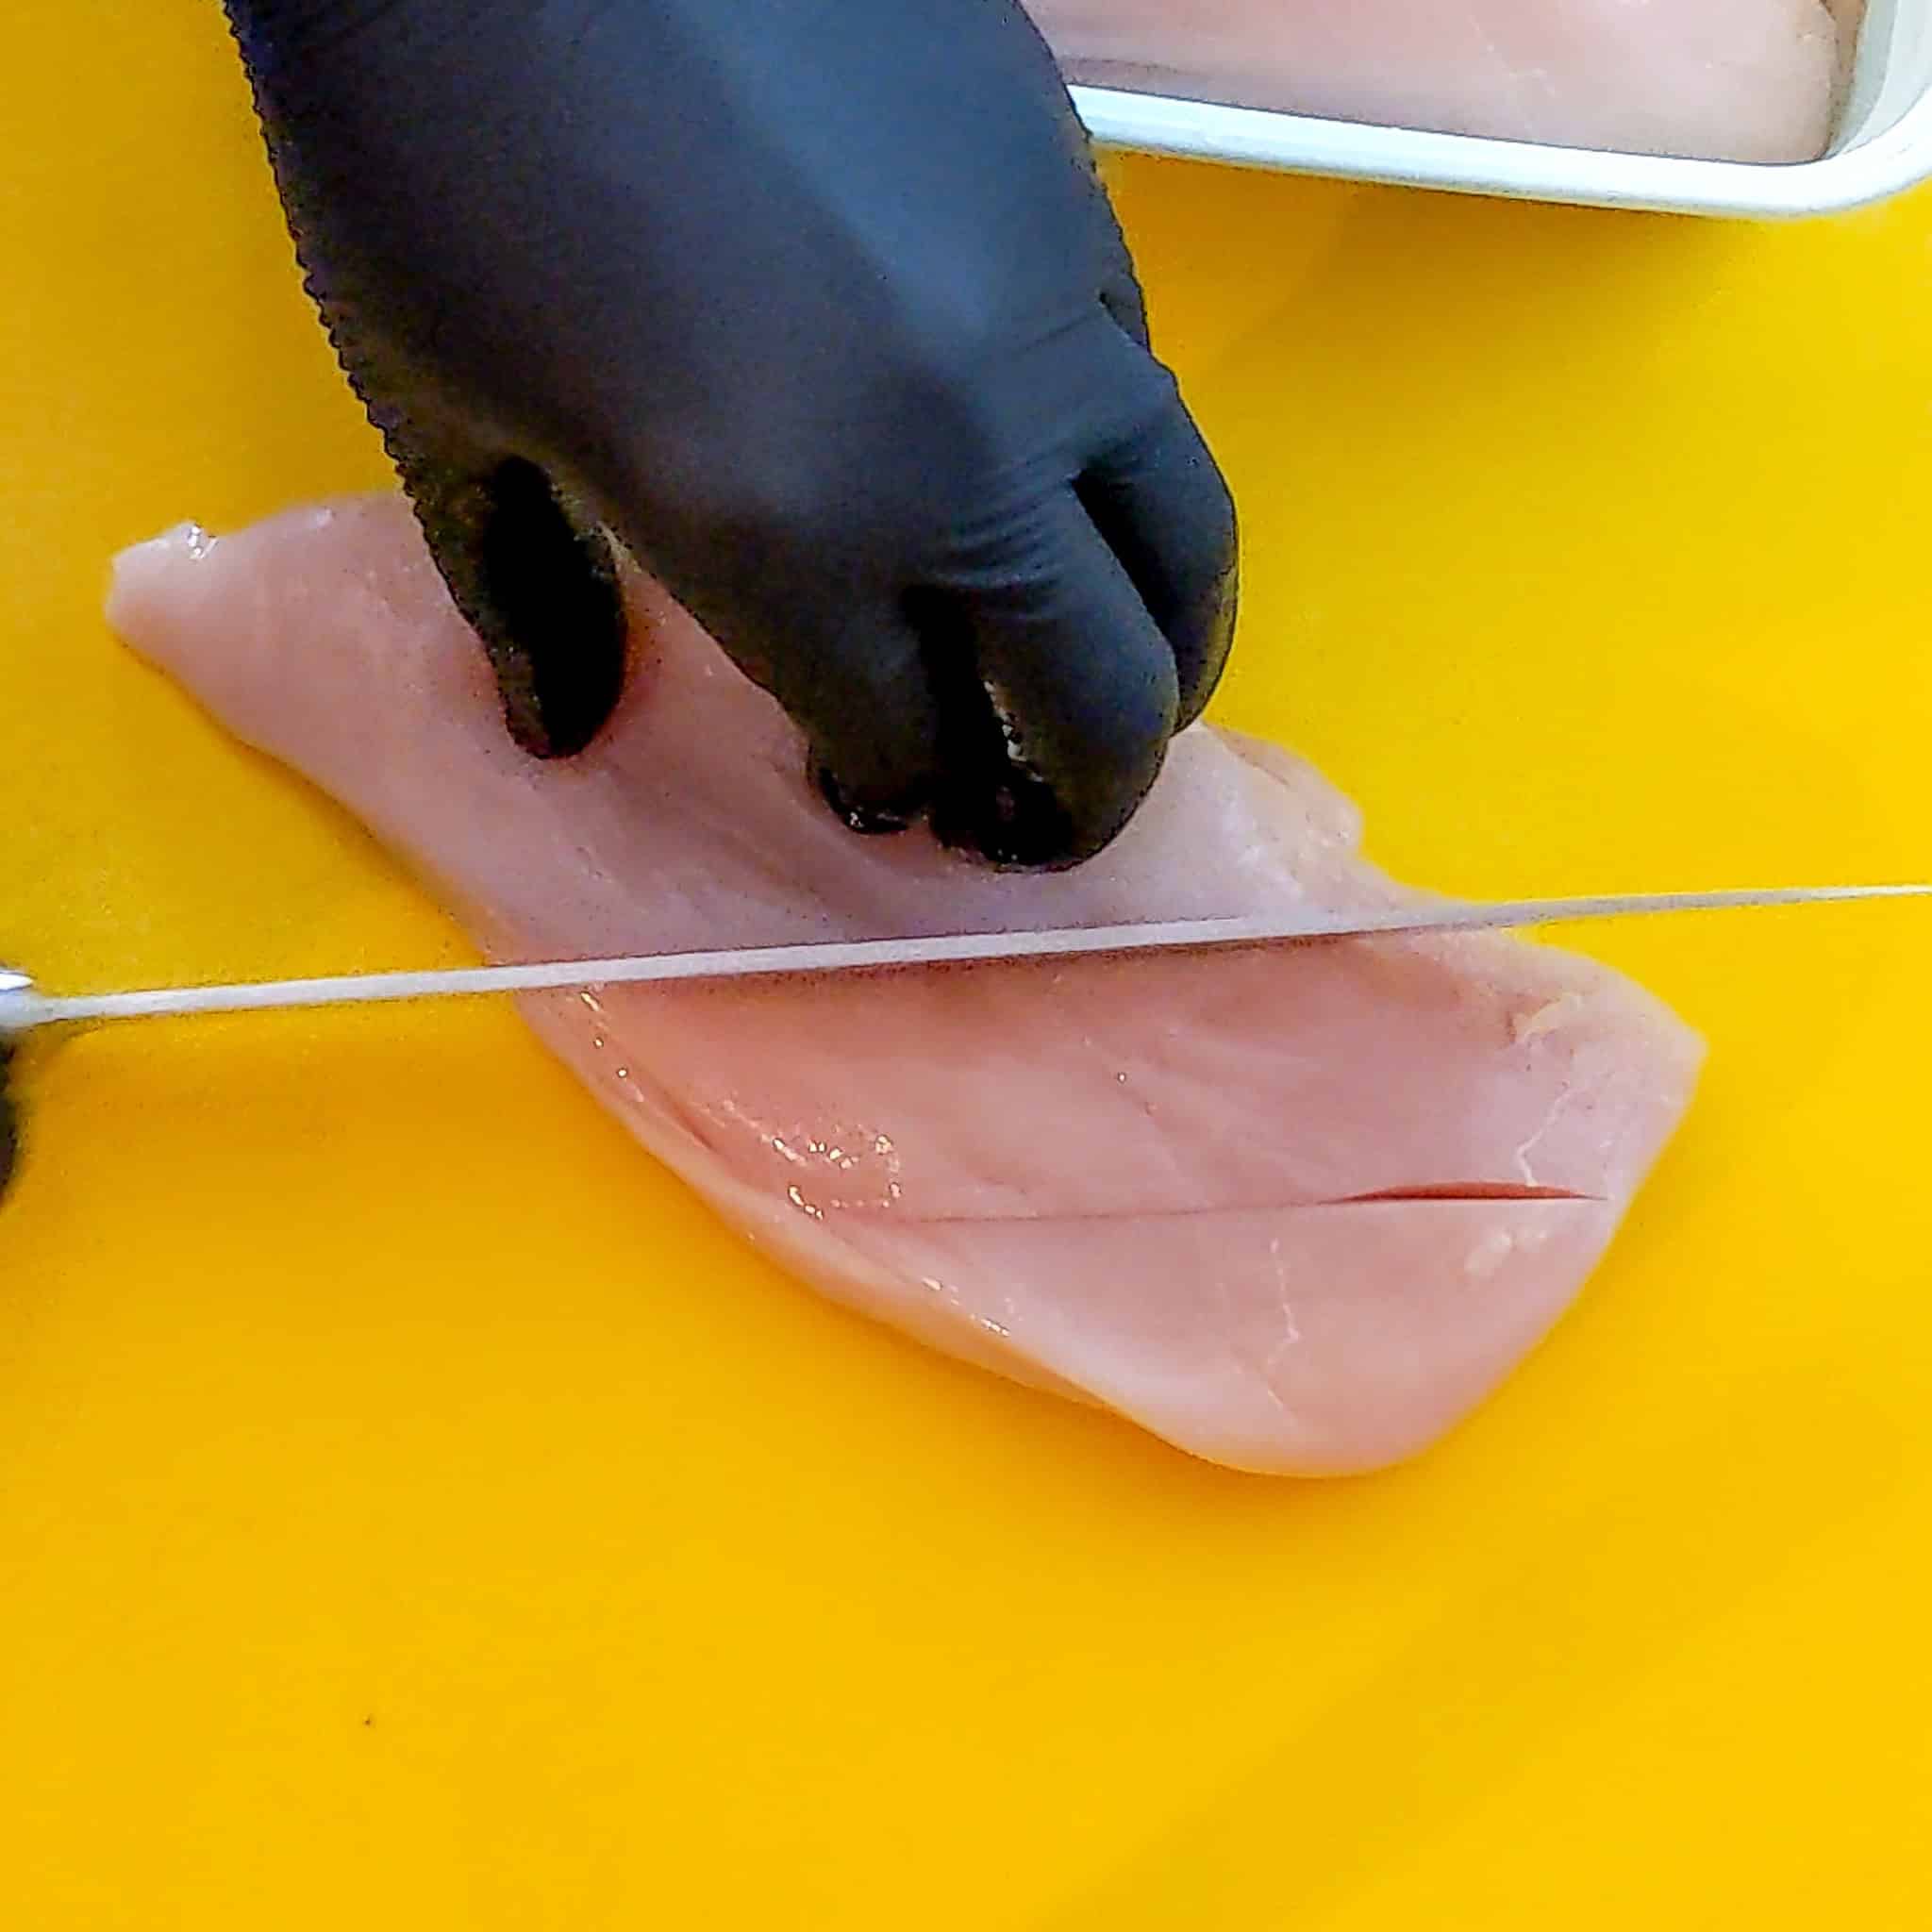 slitting chicken breast on a color coded cutting board with a knife.